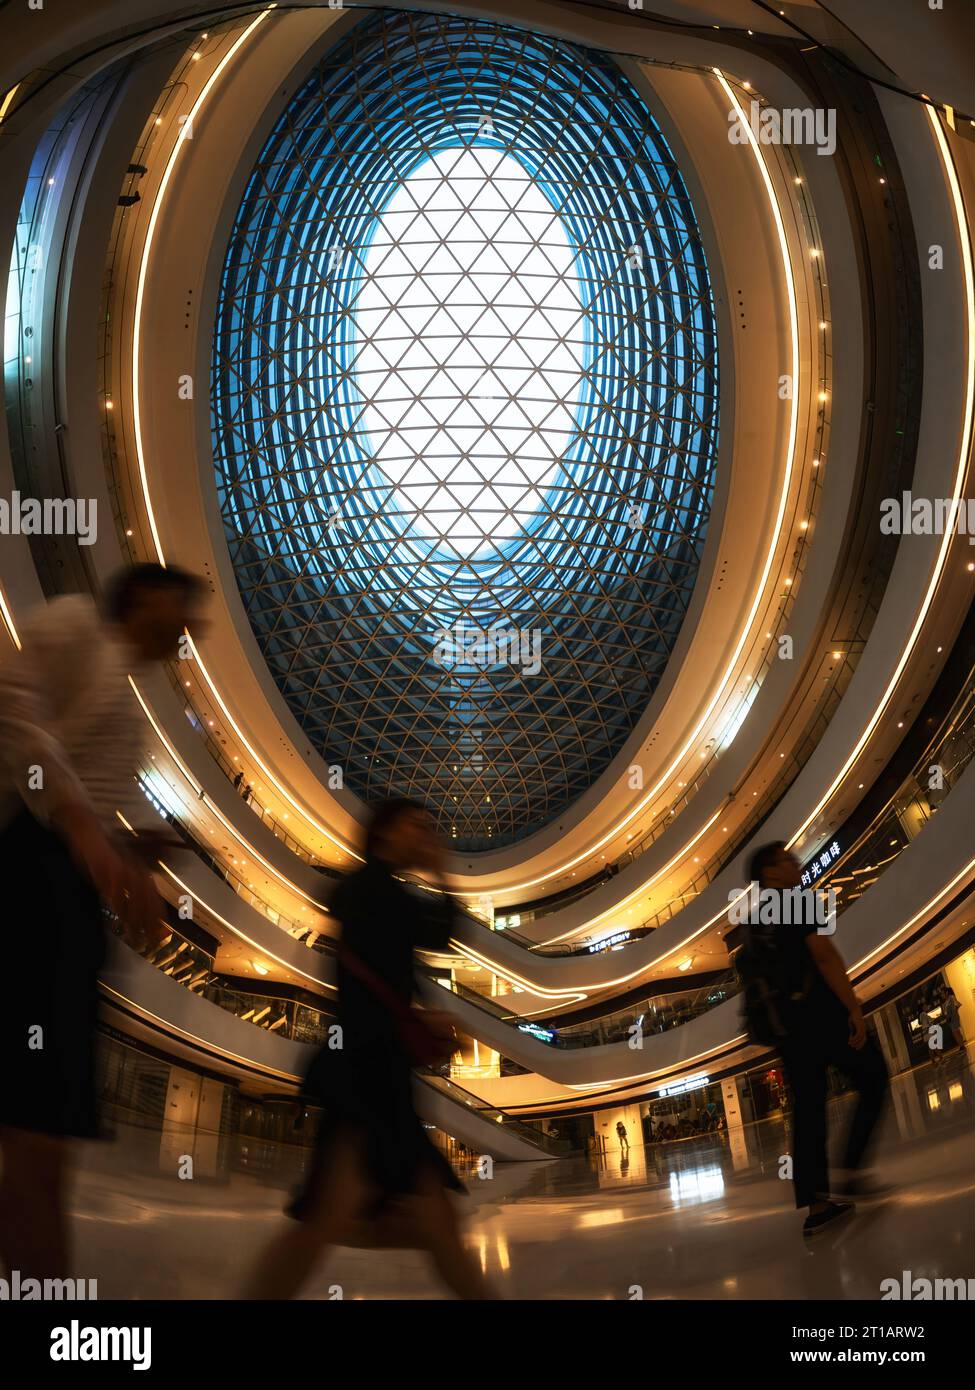 Interiors of architectural landmark Galaxy SOHO, a modern urban complex building located in Beijing, China. Stock Photo